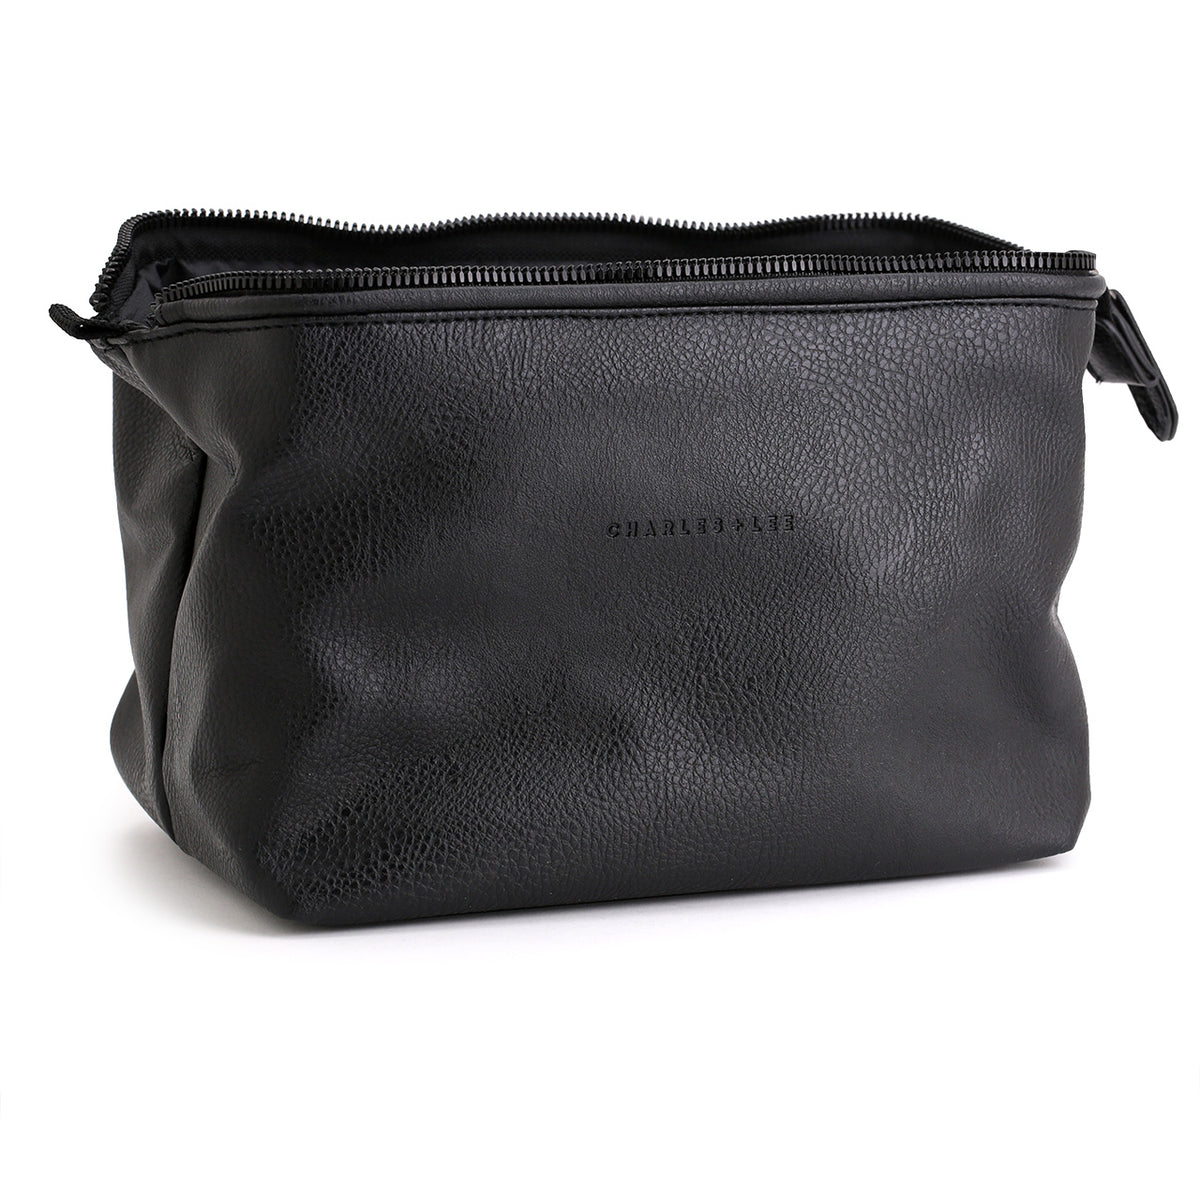 Charles and Lee black toiletry bag opened to show the full height and structured wire and zipper closure